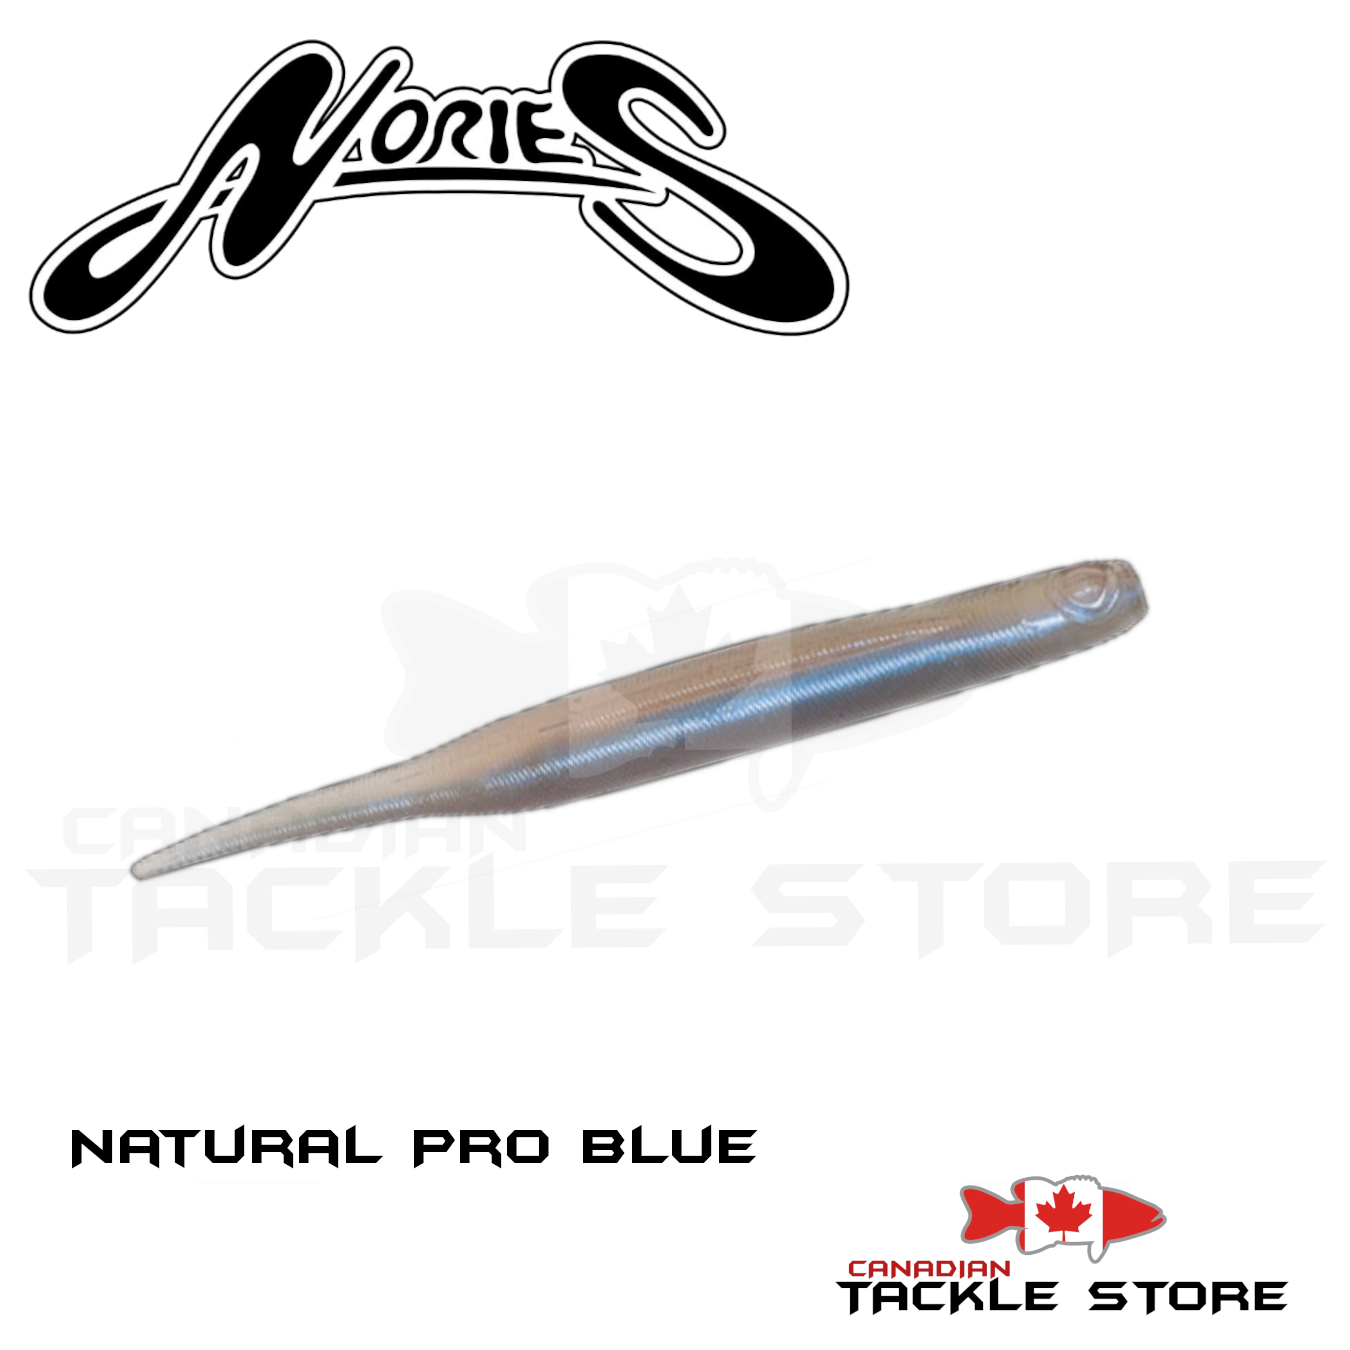 Nories Lady Fish – Canadian Tackle Store